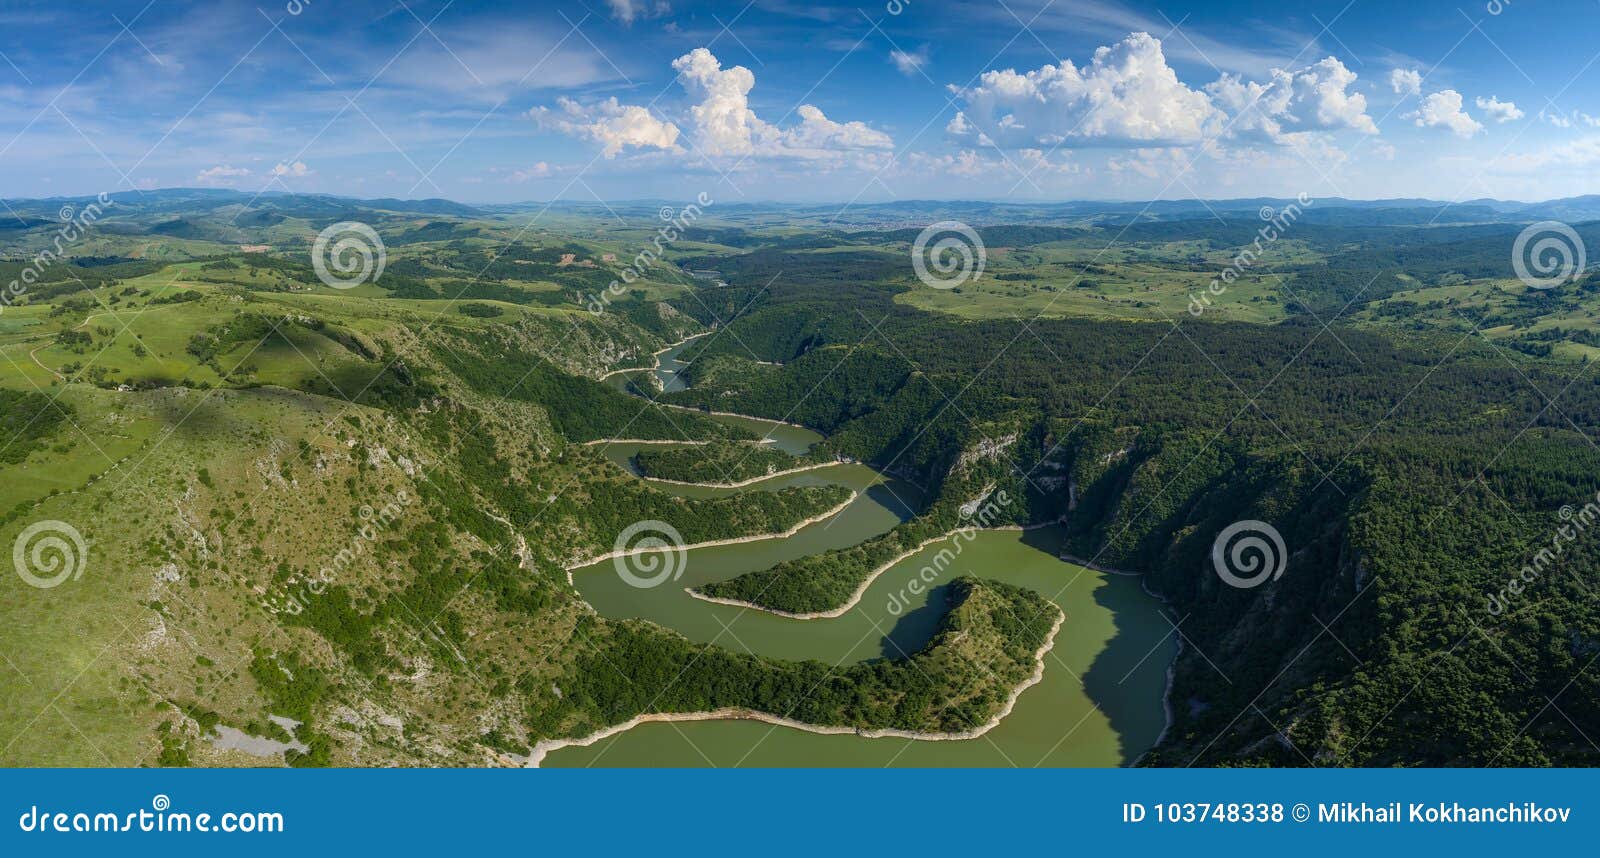 meanders at rocky river uvac river in serbia